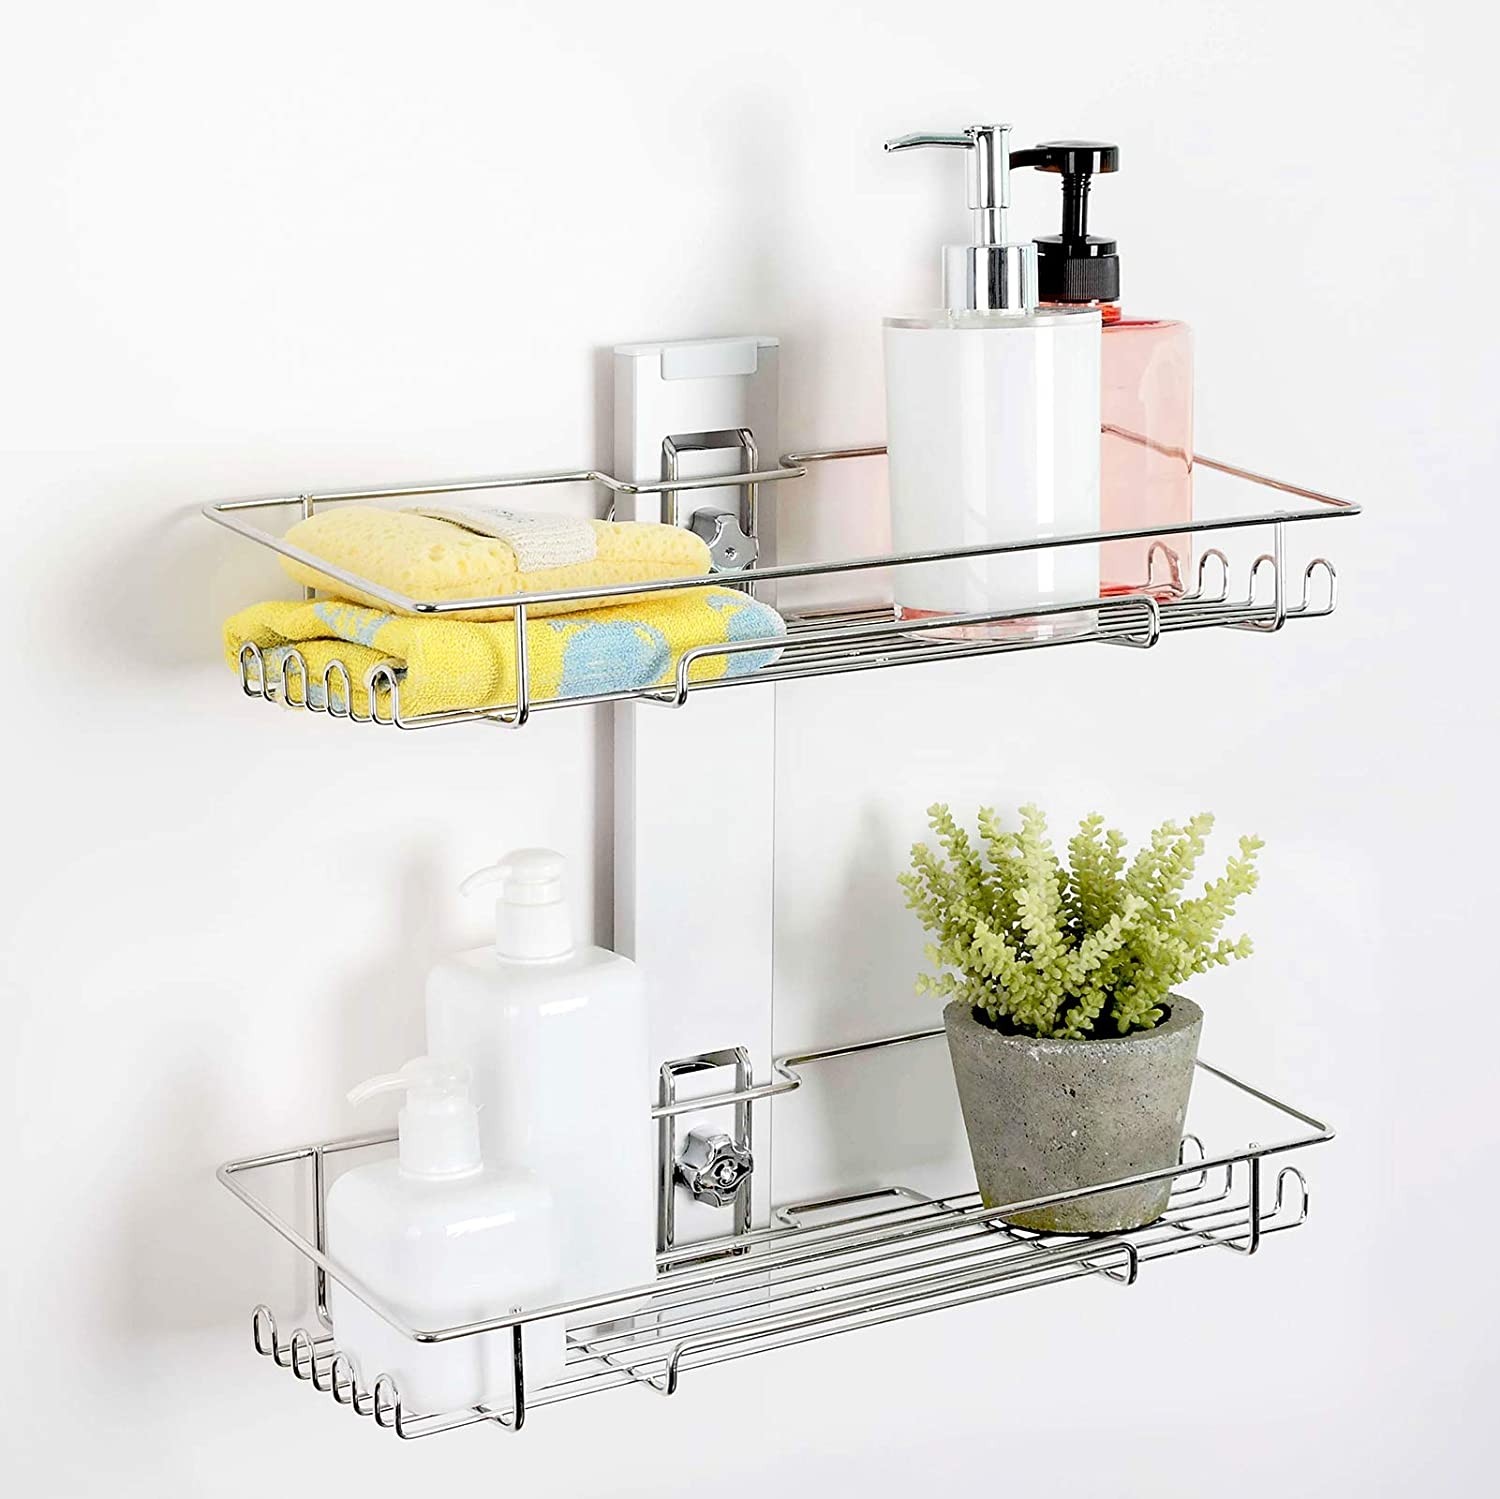 [BATHBEYOND] Shower Caddy Suction Cup Tier Shower Shelf - Adjustable Shower Caddy 400 Stainless Steel No-Drilling and Extra Adhesive Sticker for More Stronger Suction (2Tier)